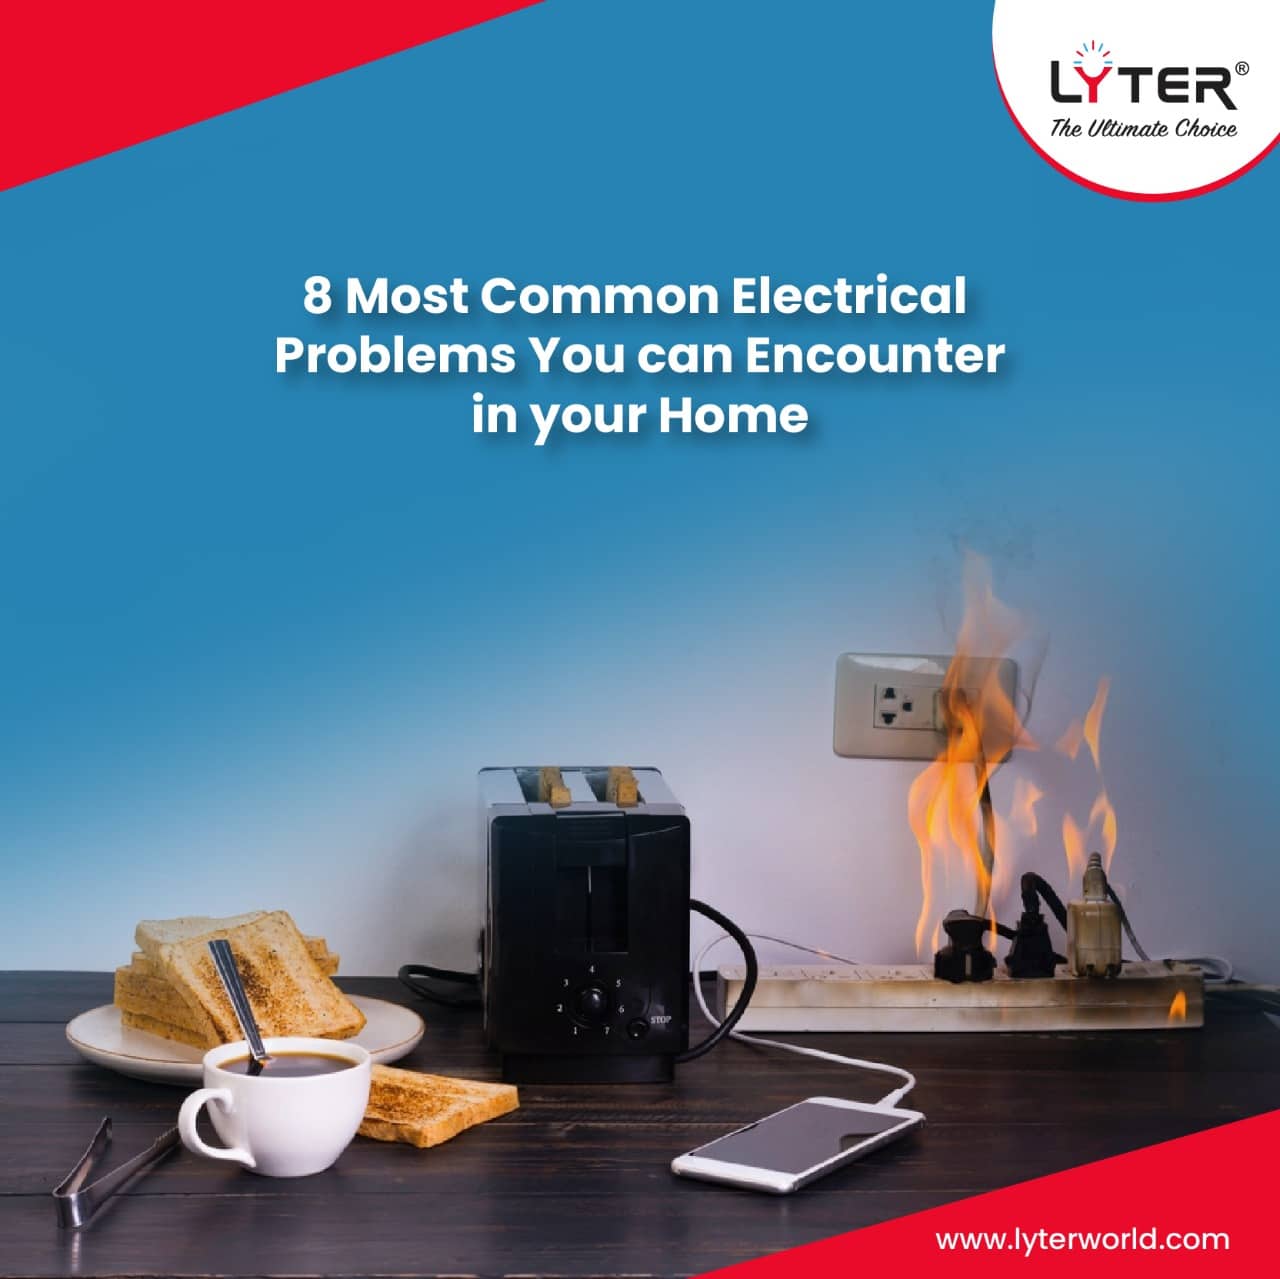 8 Common Household Electrical Problems